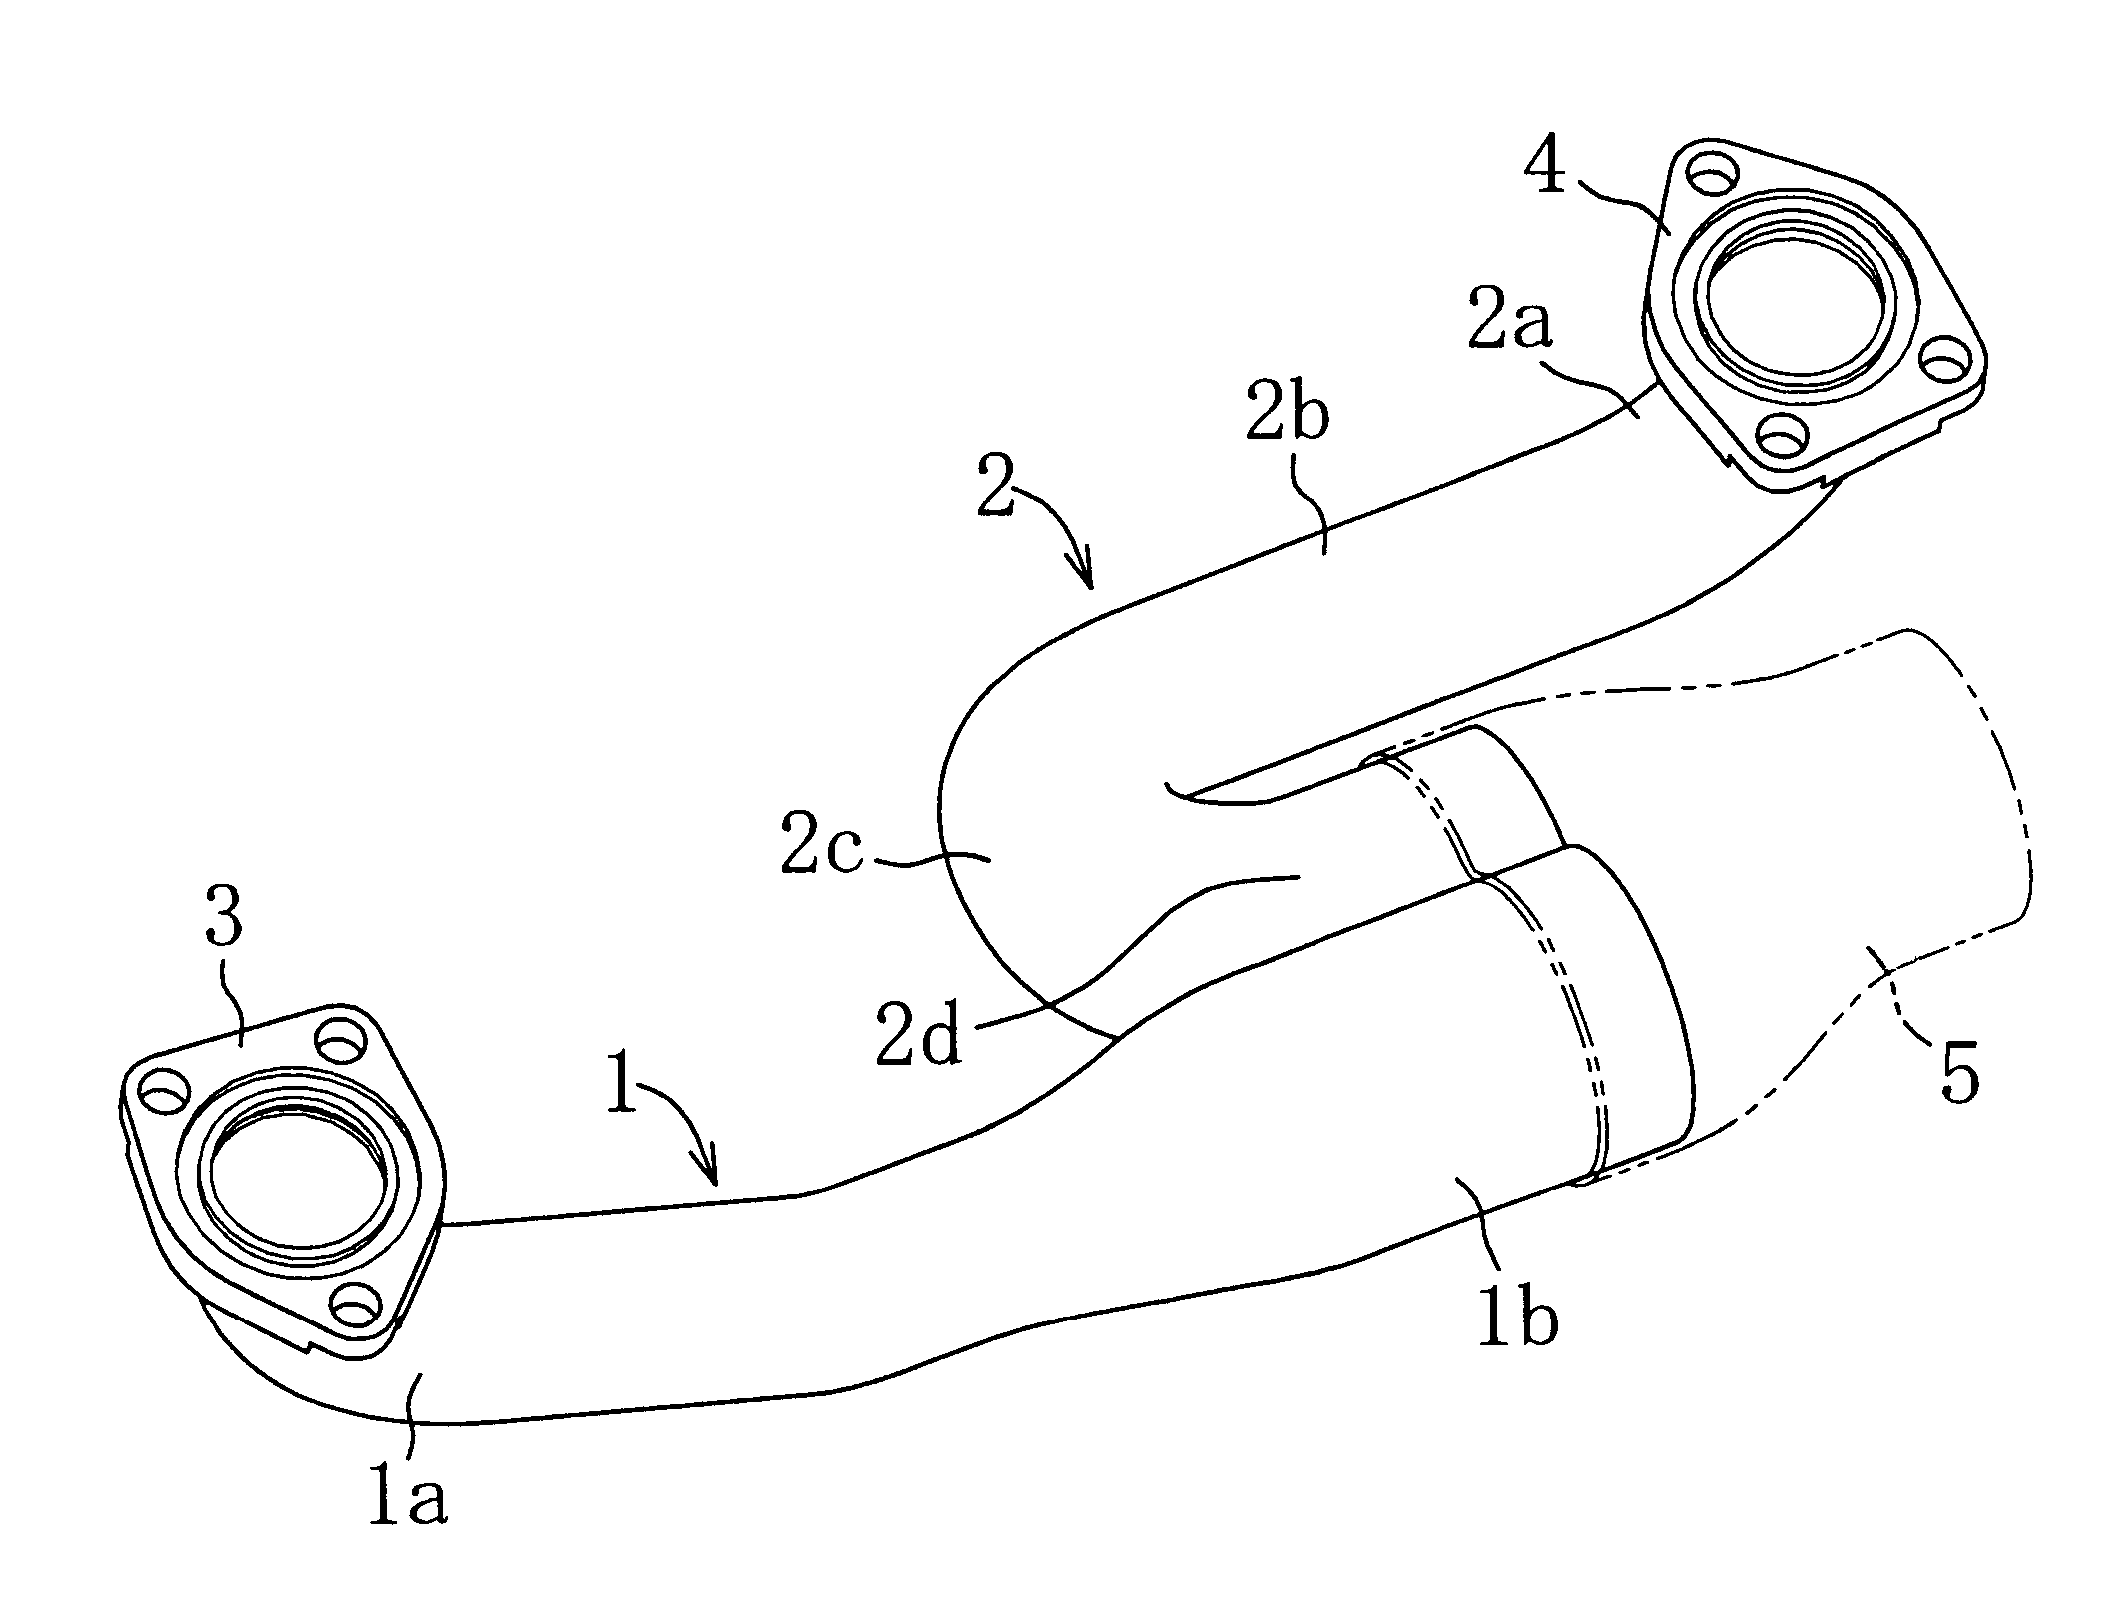 Engine exhaust system